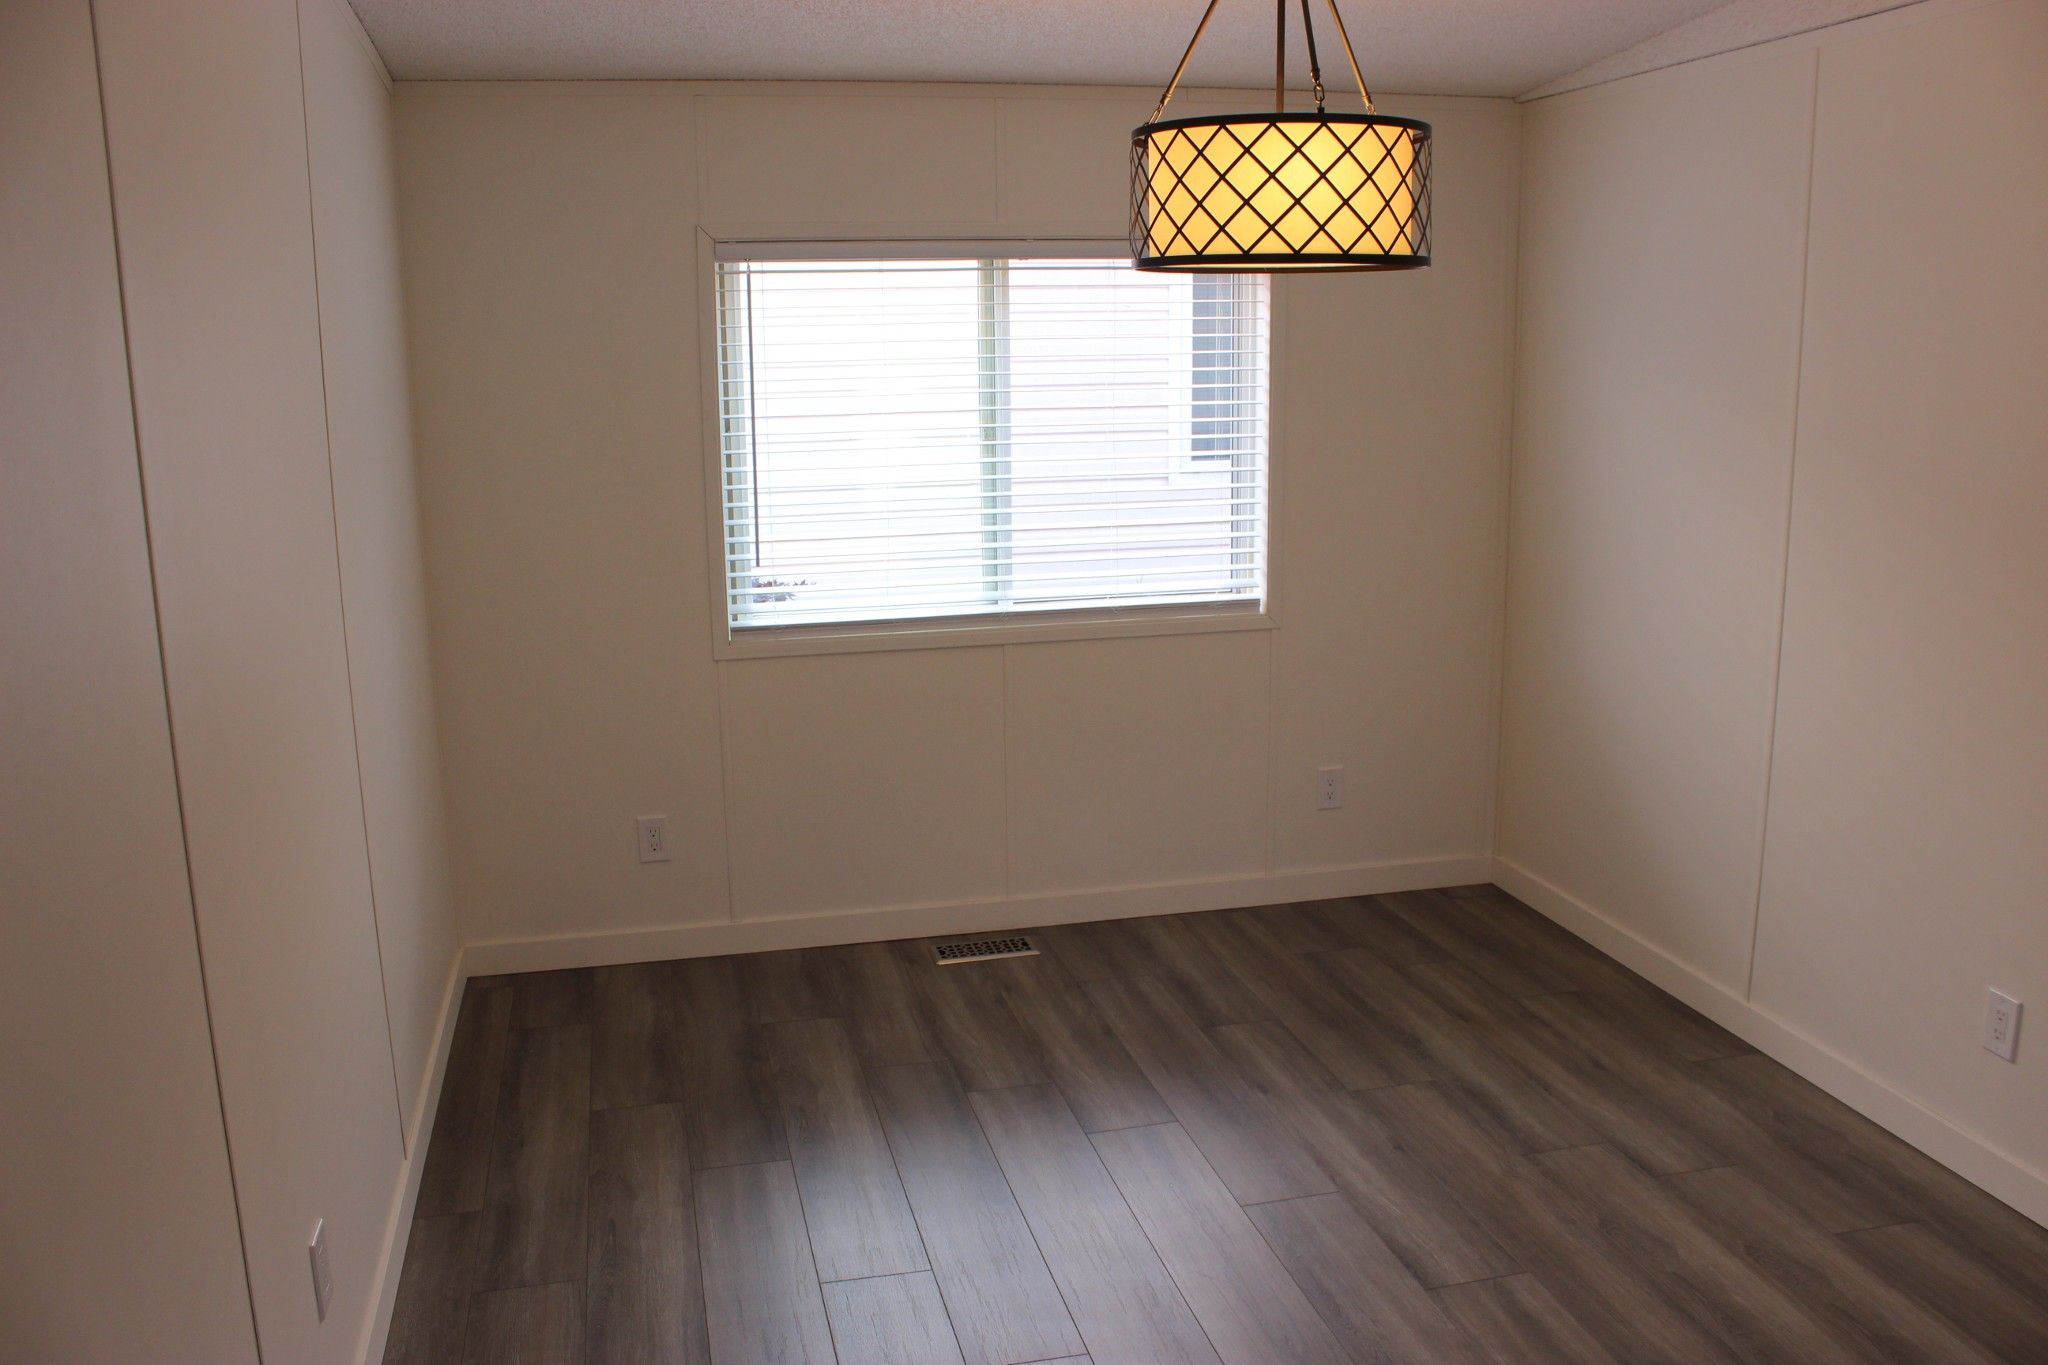 Photo 9: Photos: 22 3099 E Shuswap Road in Kamloops: South Thompson Valley Manufactured Home for sale : MLS®# 147827